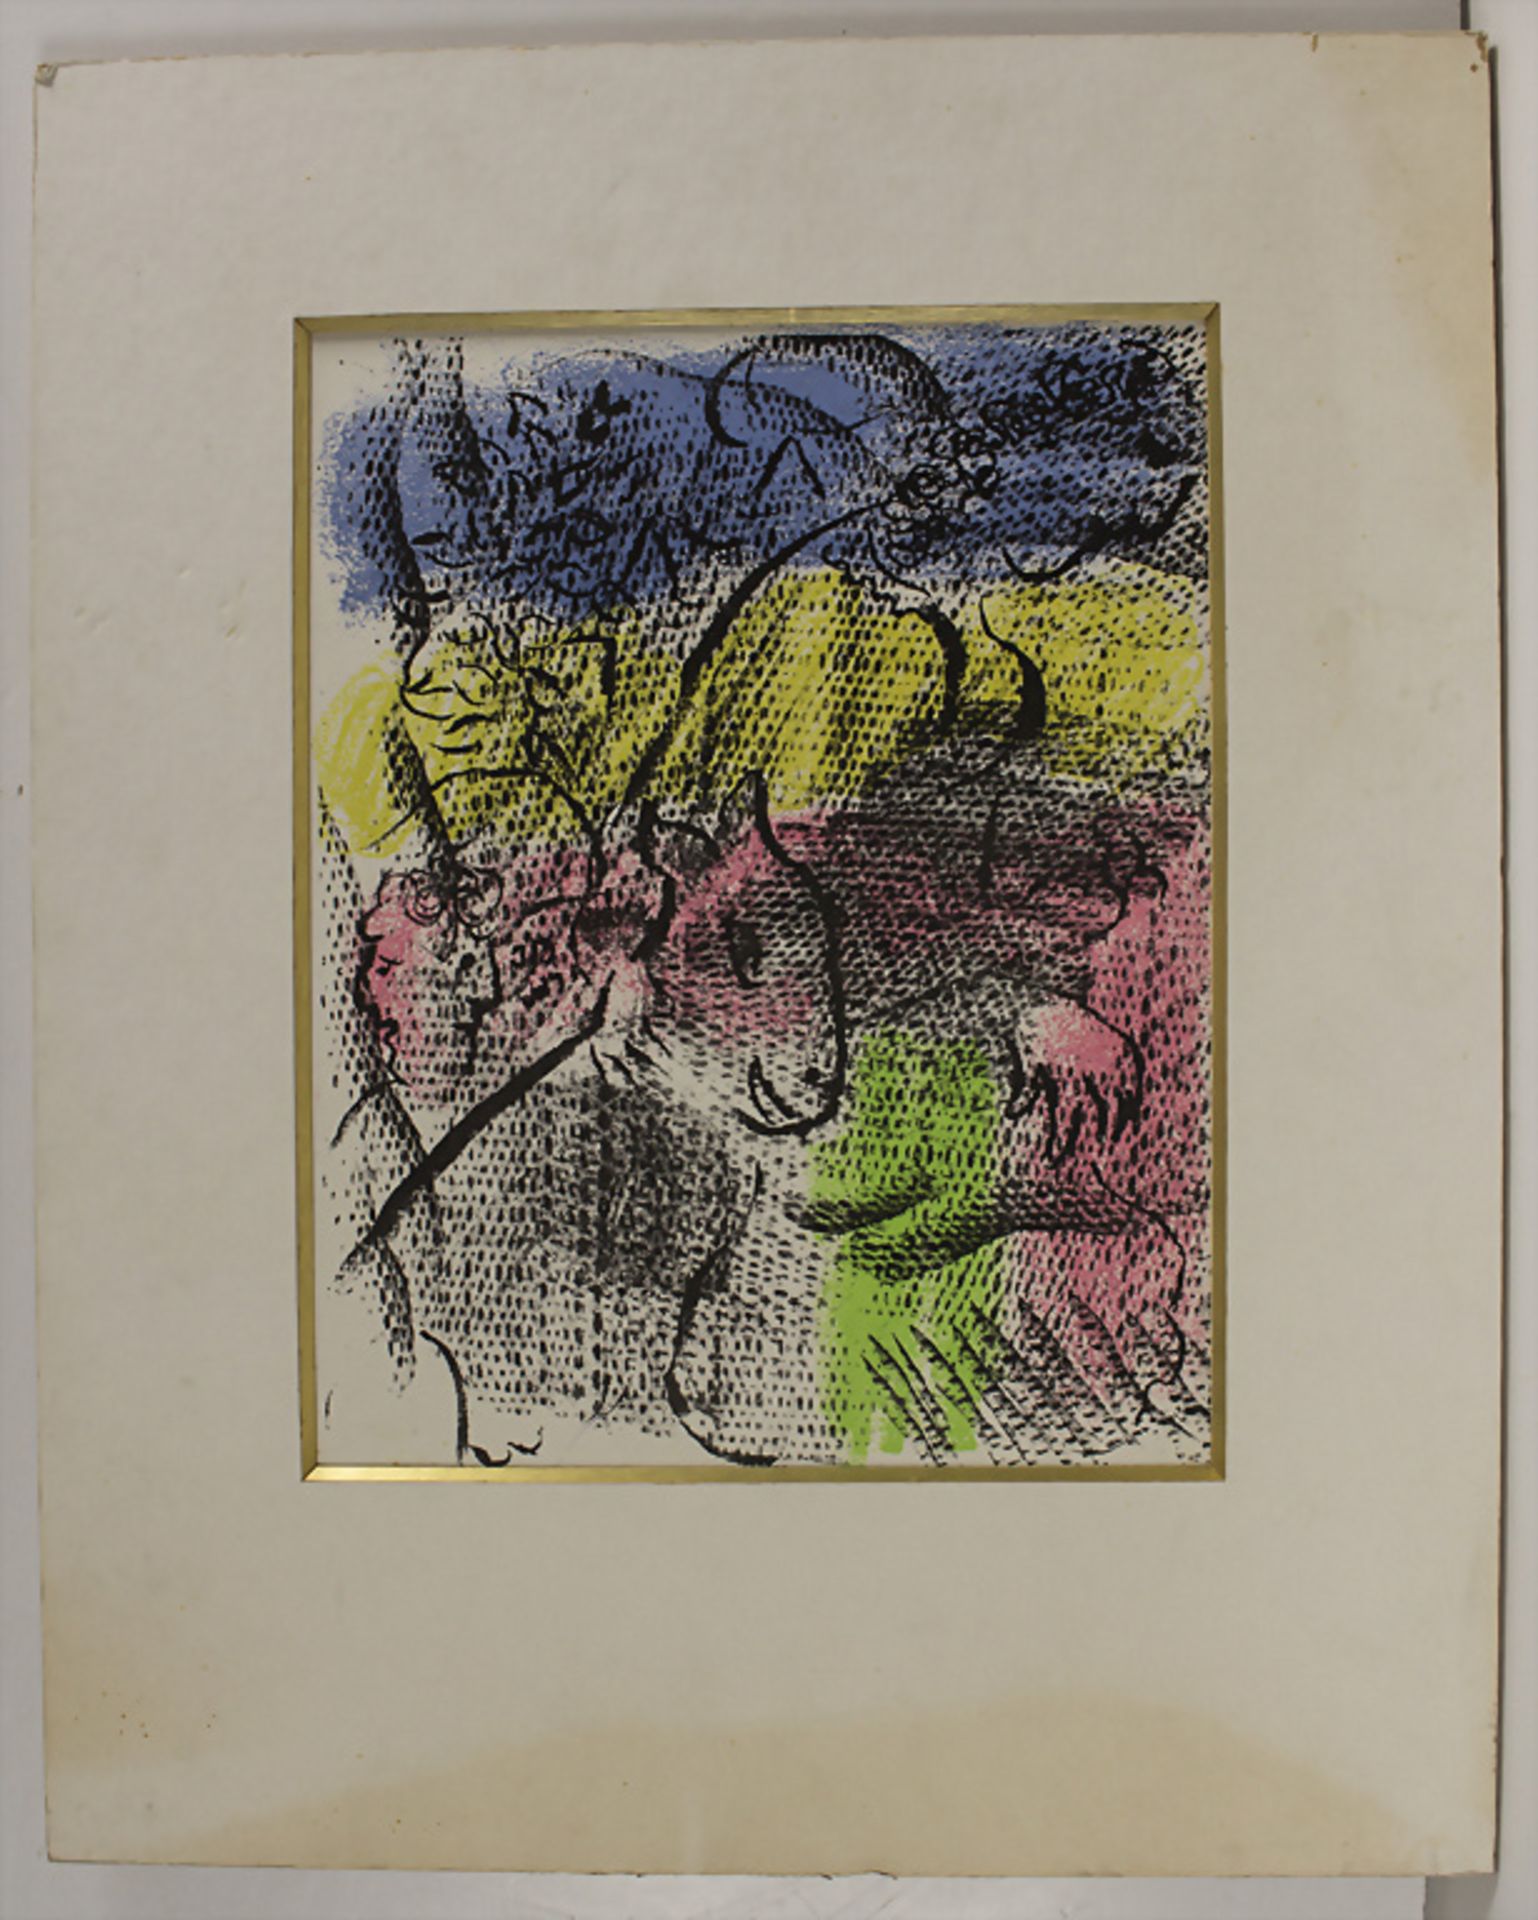 Marc Chagall (1887-1985), 'Frau mit Esel' / 'A woman with a donkey', 1970 - Image 2 of 3